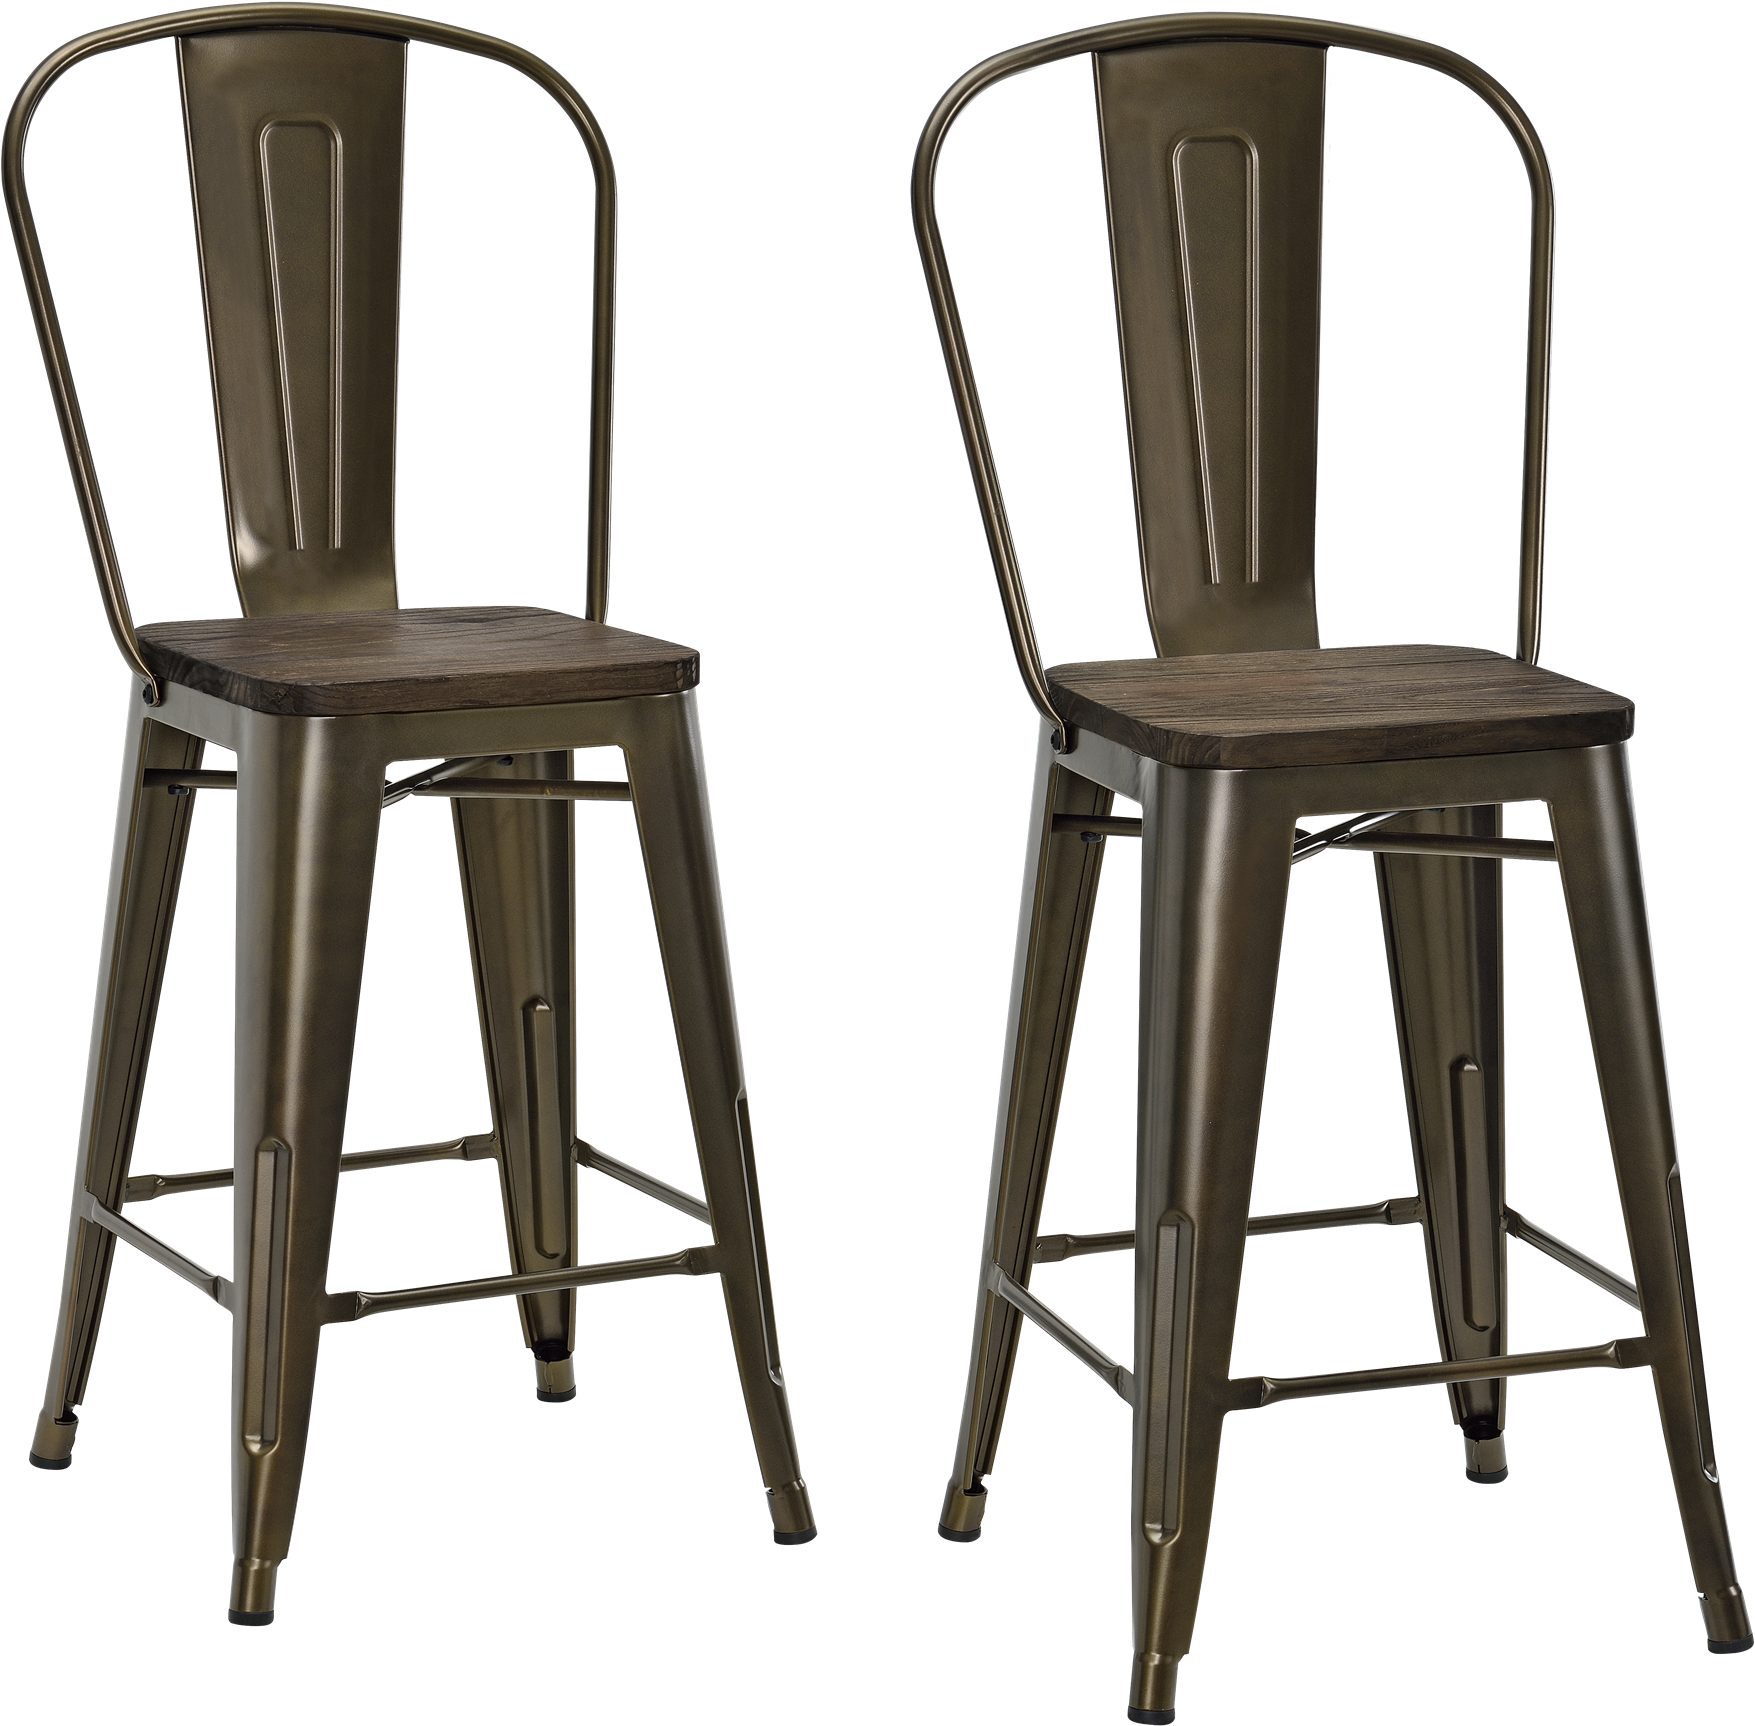 A Pair Of Metal Chairs PNG